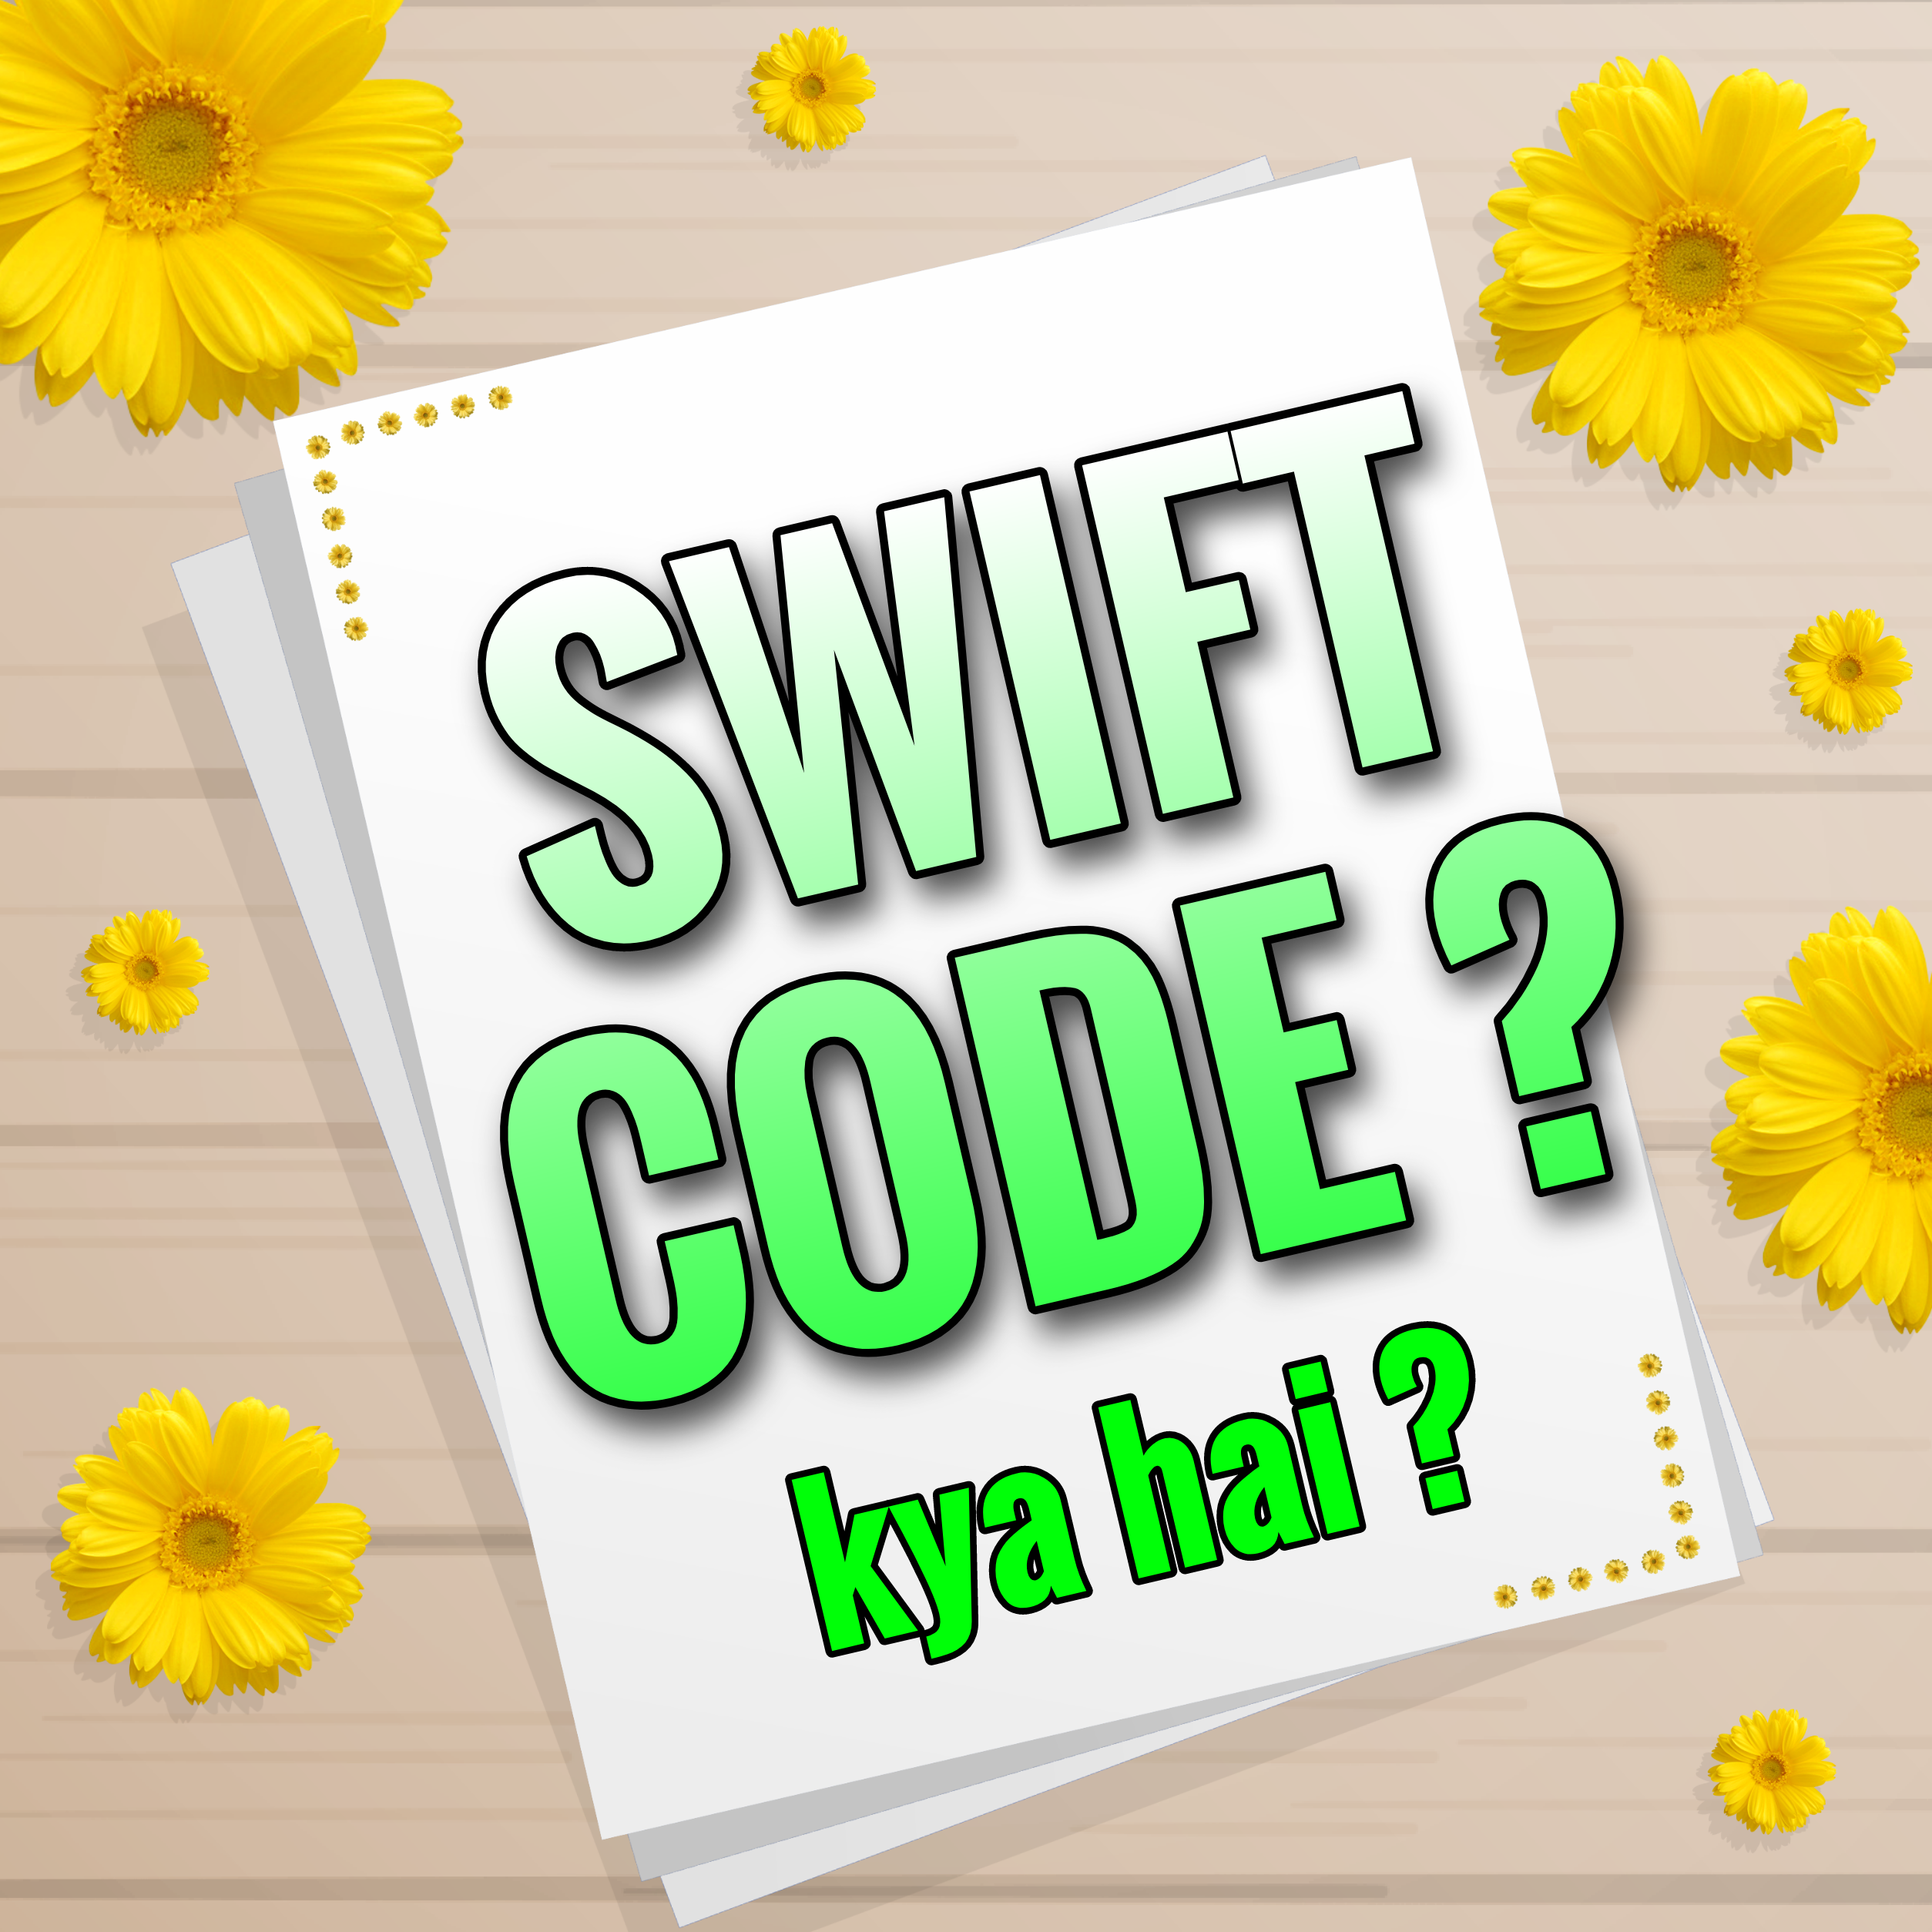 What is a SWIFT/BIC code?